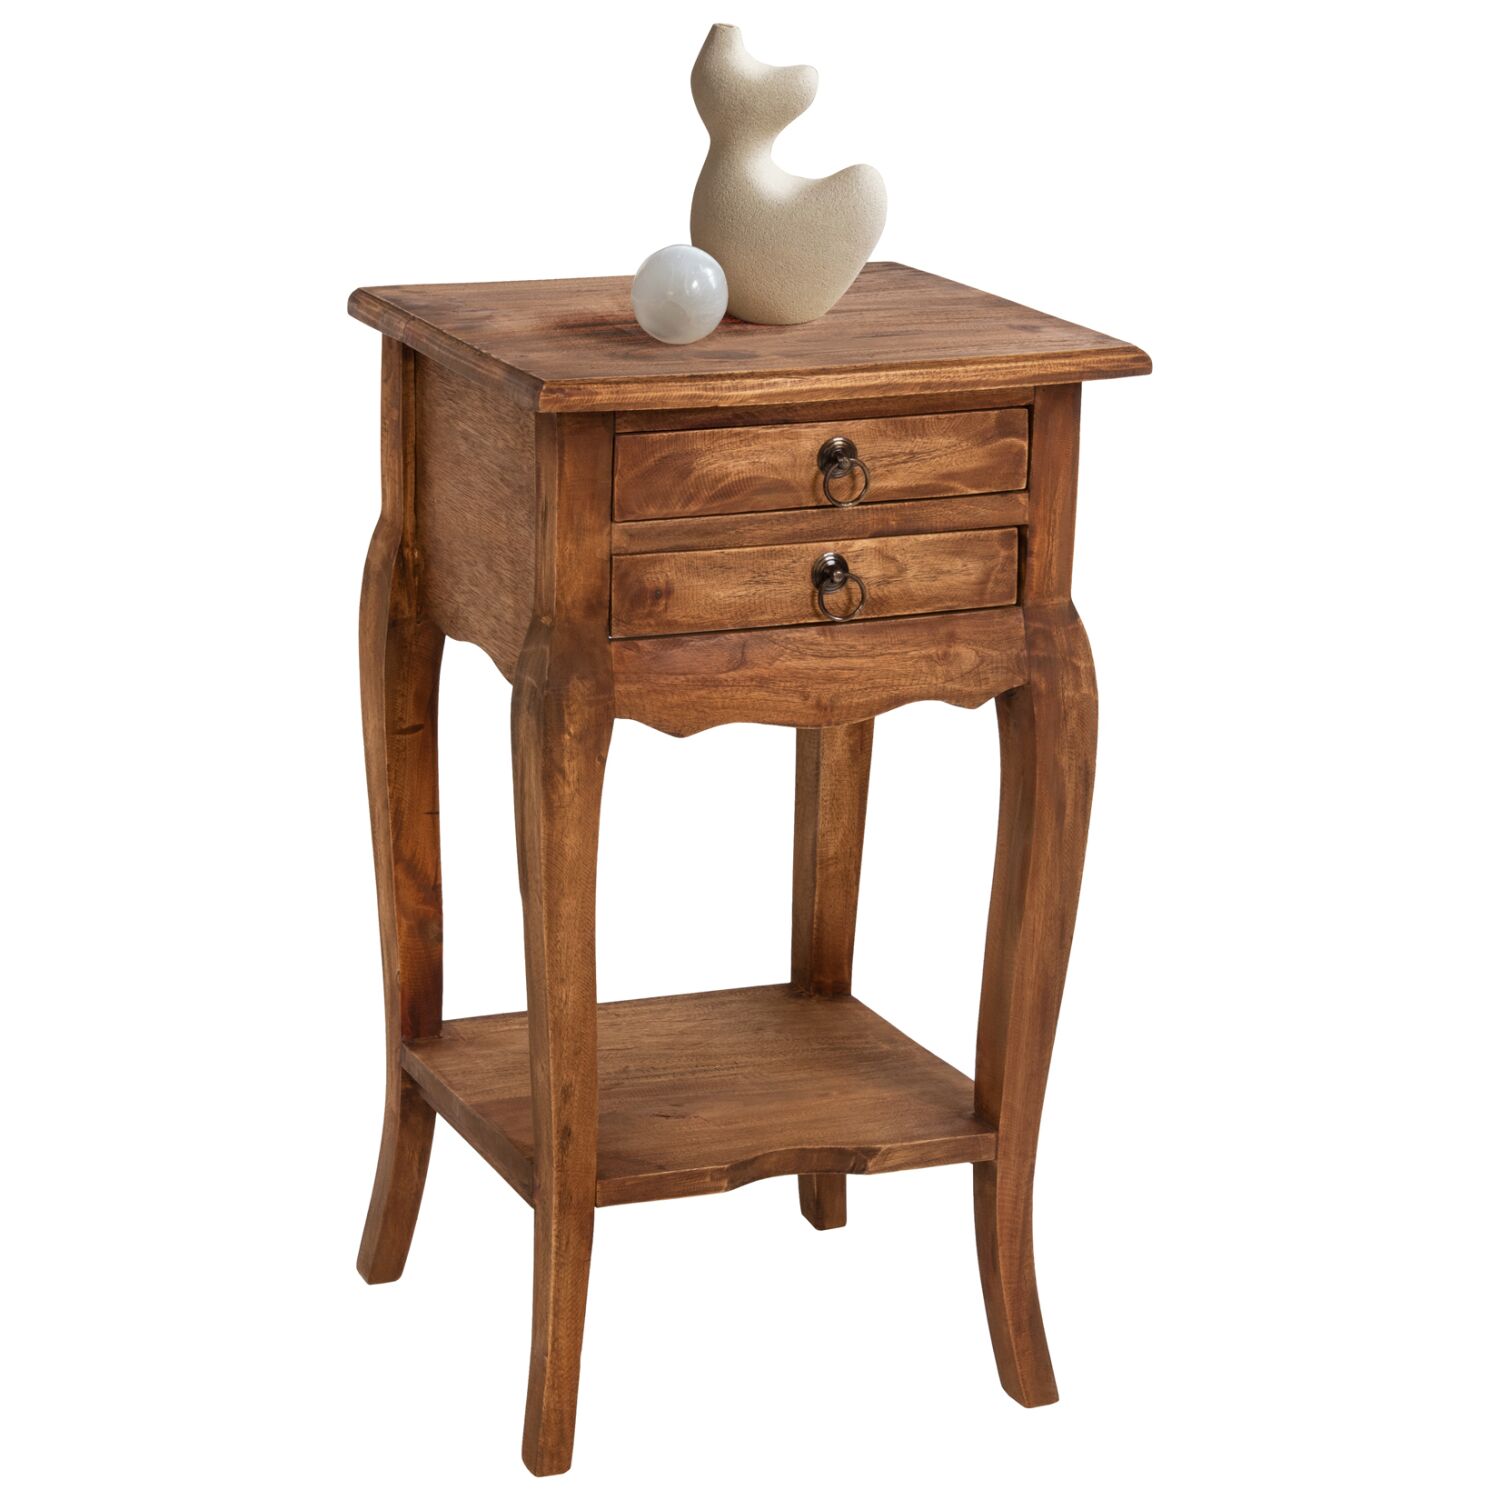 SIDE TABLE WITH 2 DRAWERS HM7904 MAHOGANY WOOD IN NATURAL COLOR 40x30x67Hcm.